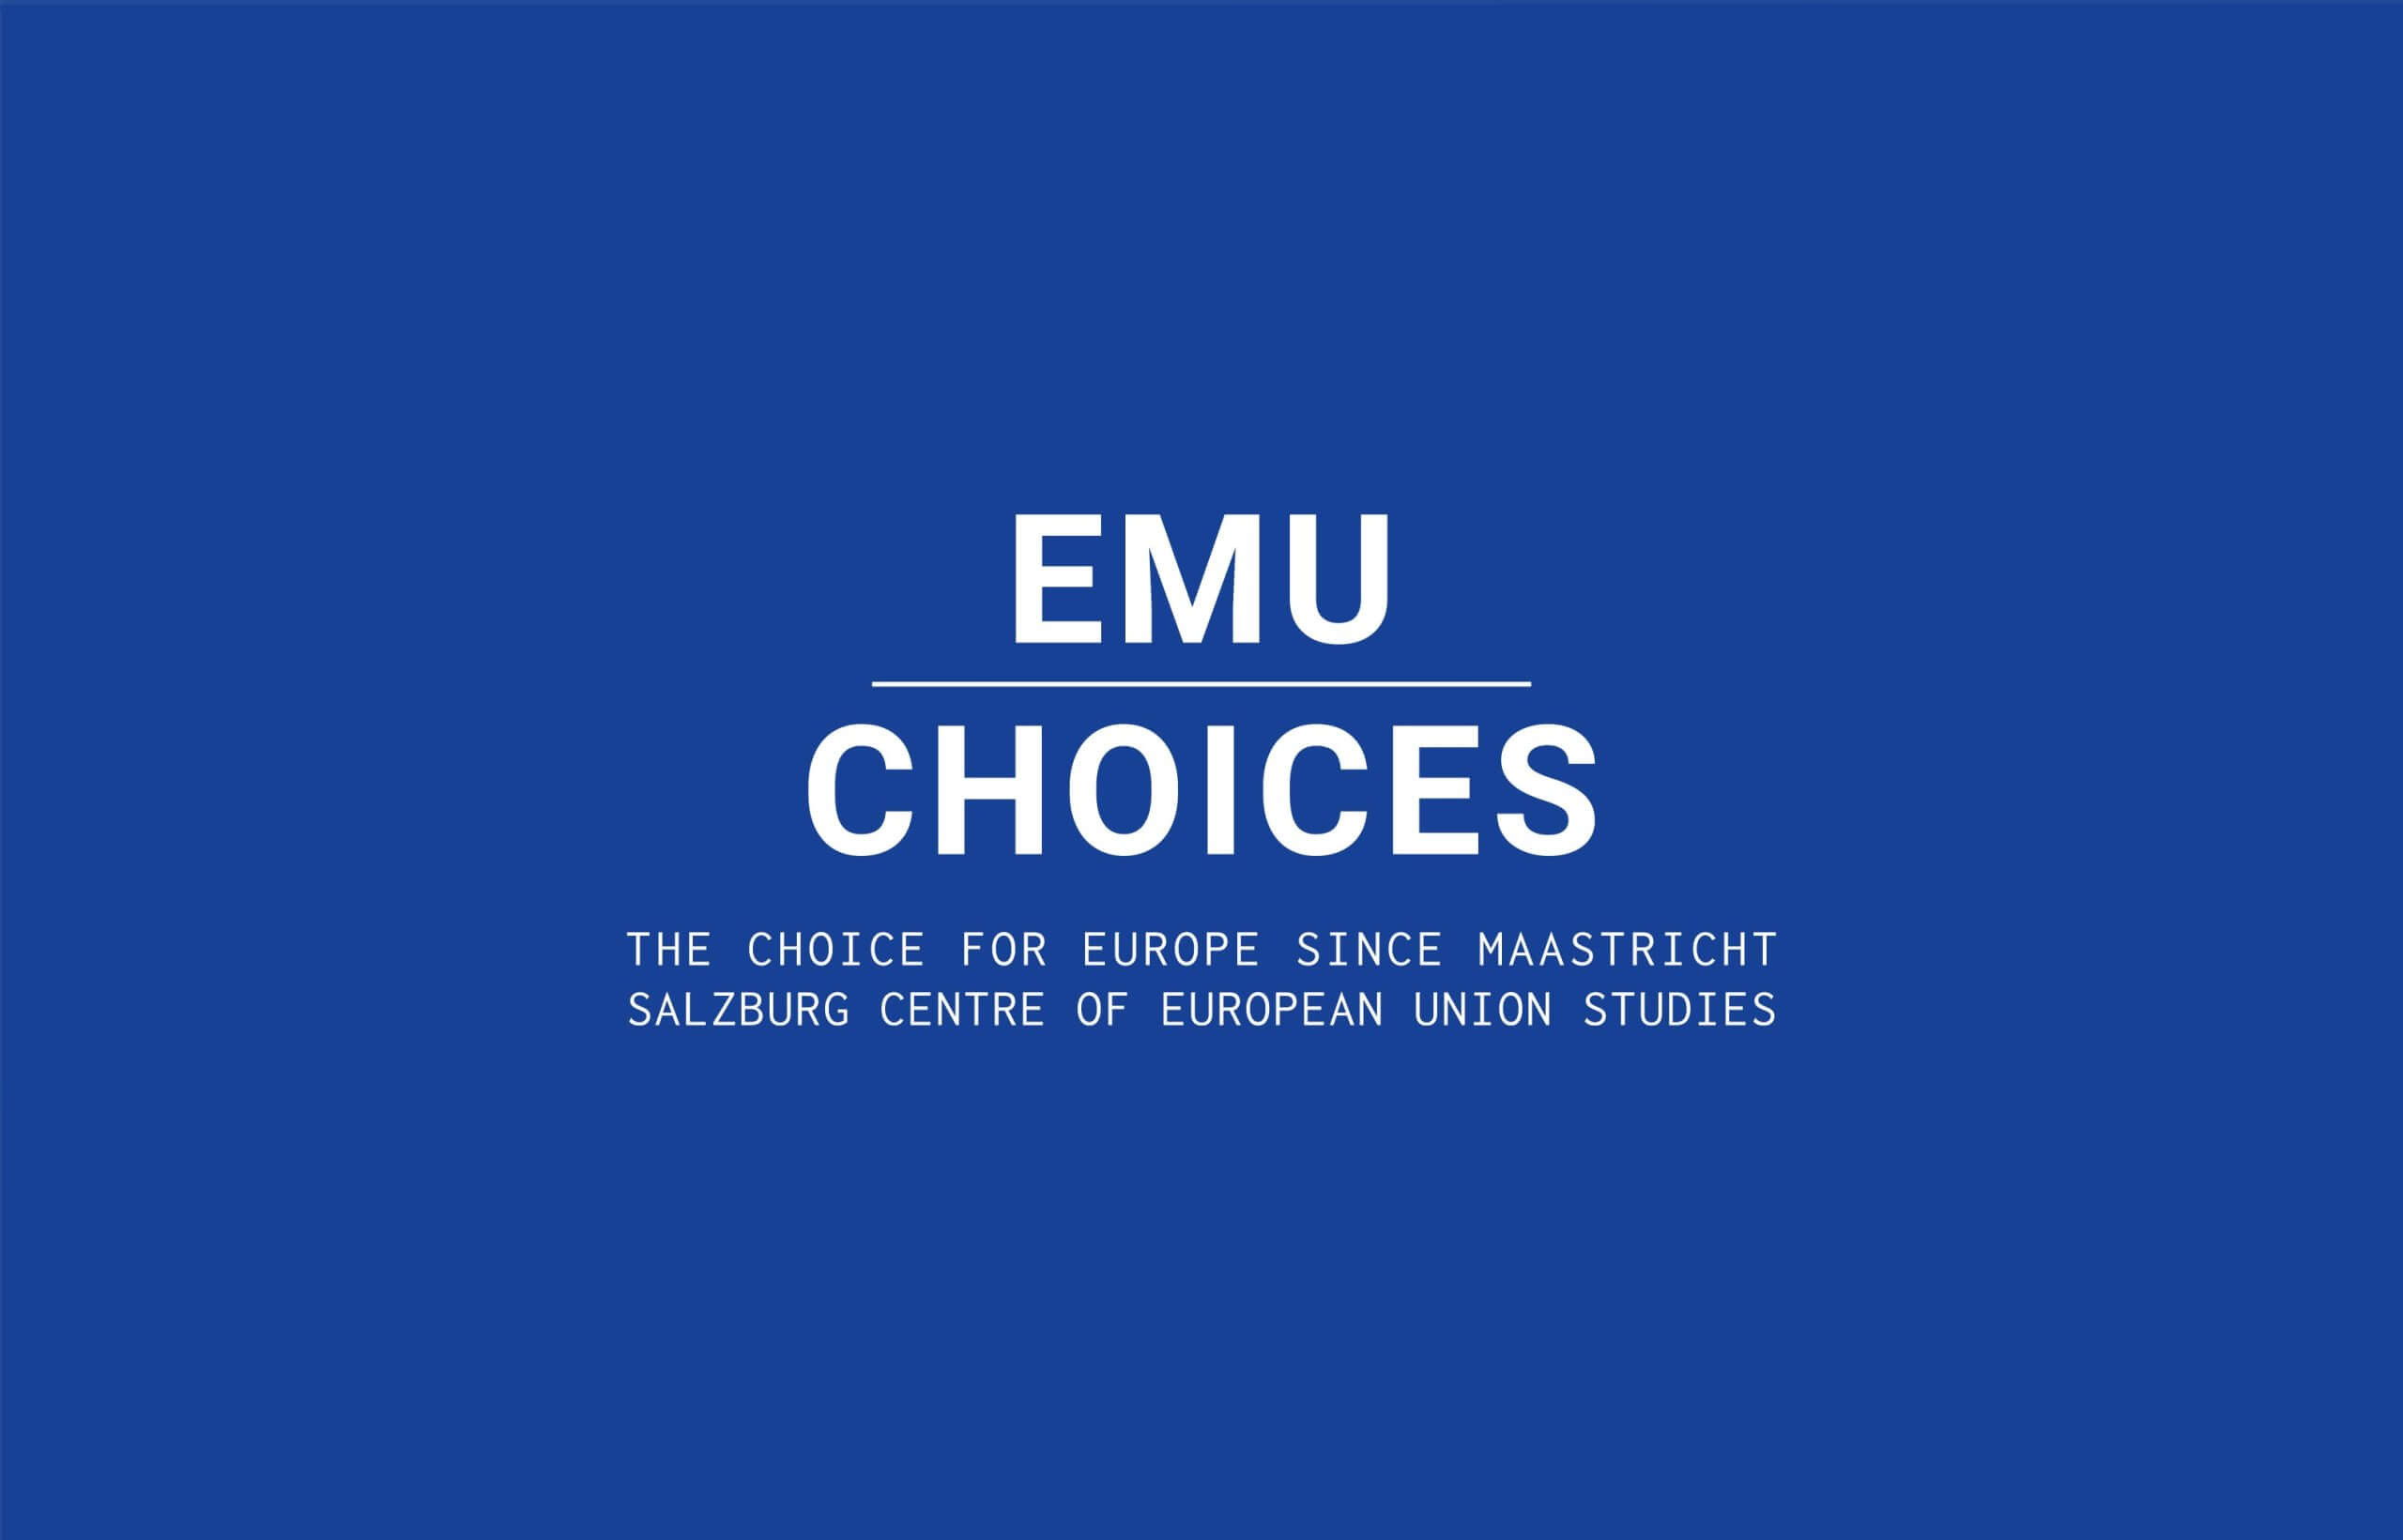 EMU Choices / Horizon2020 Research Project